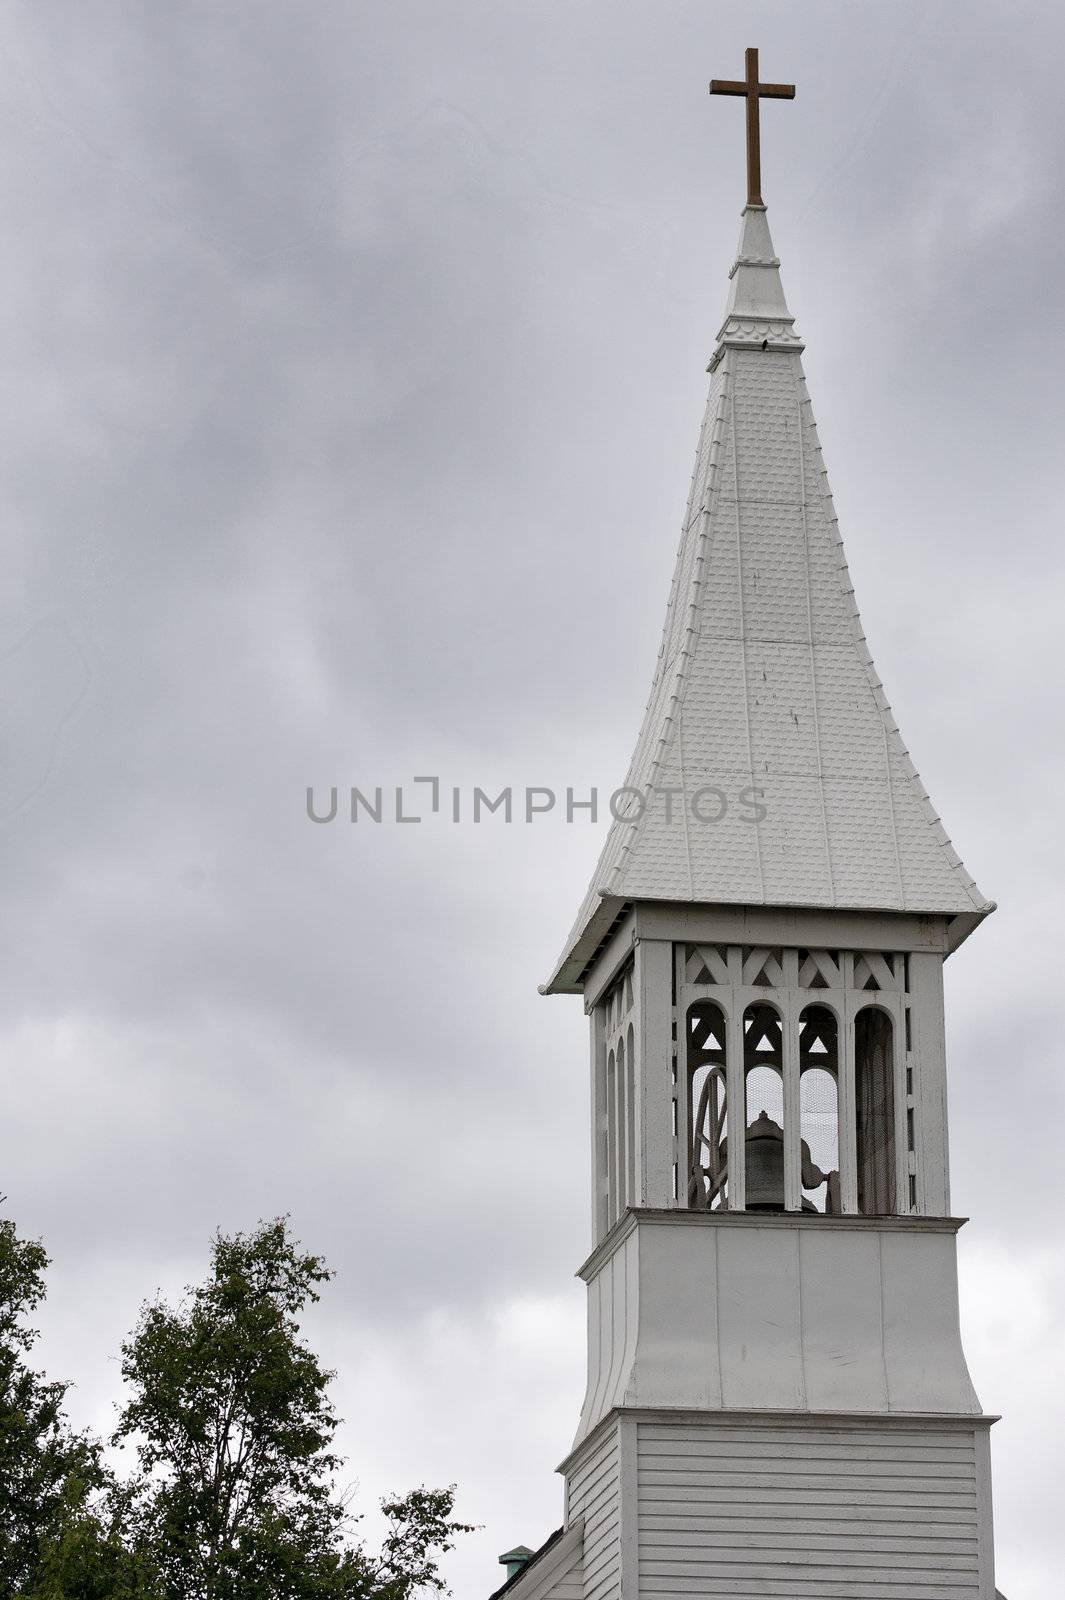 Steeple of the Immaculate Conception Church in Fairbanks. by Claudine